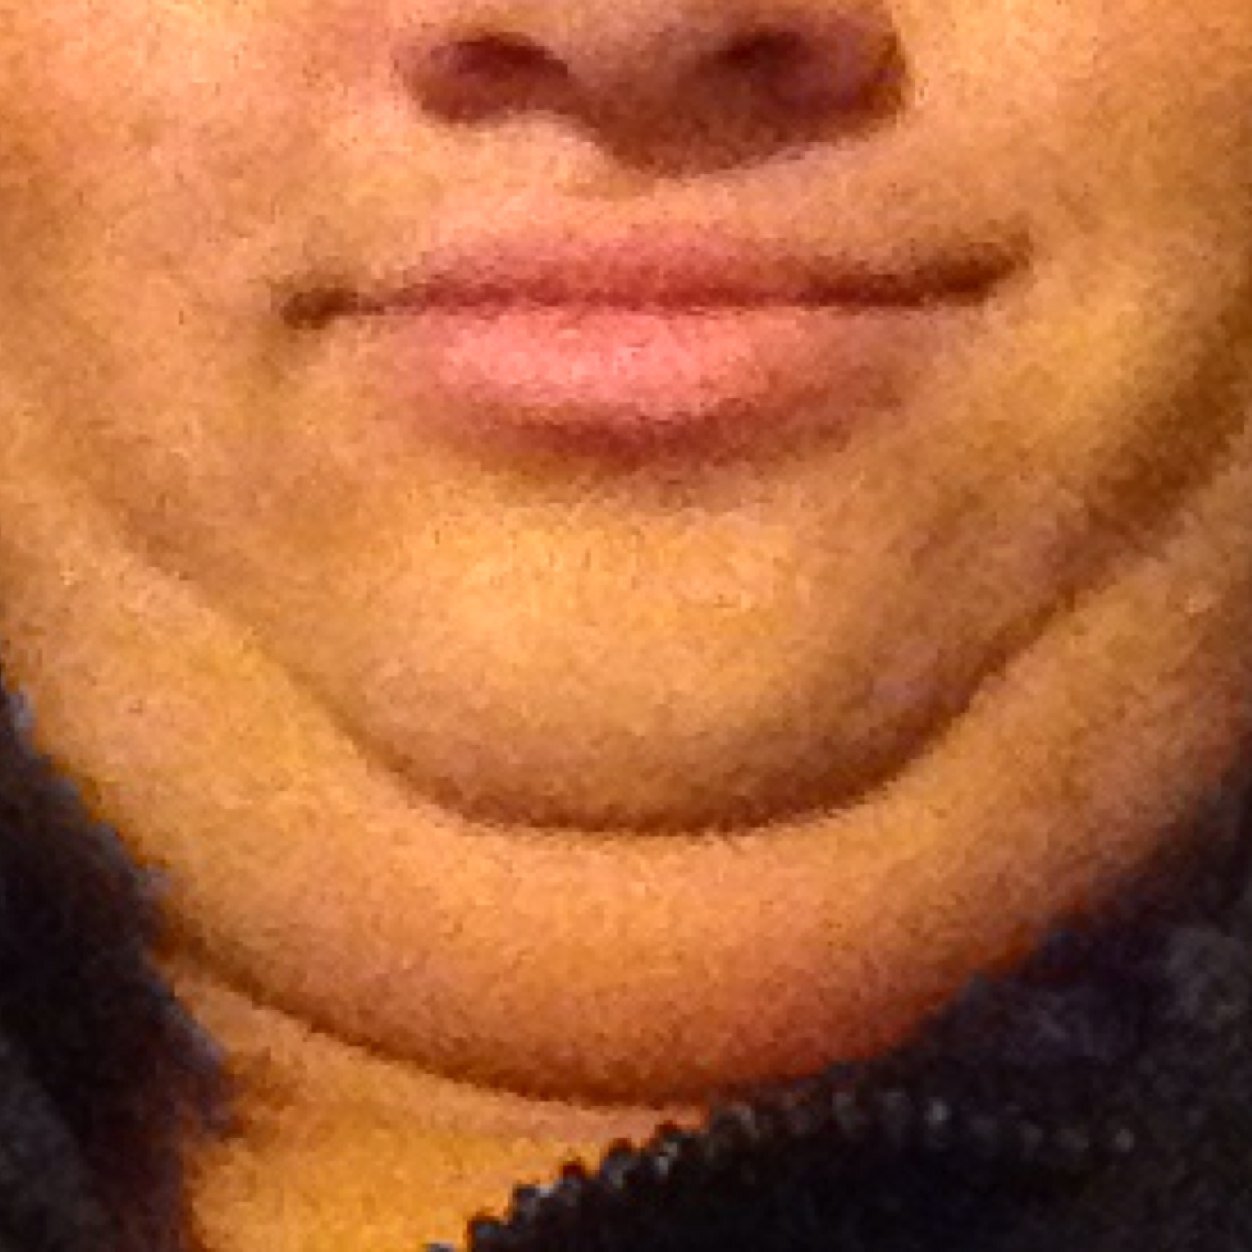 I love doublechins